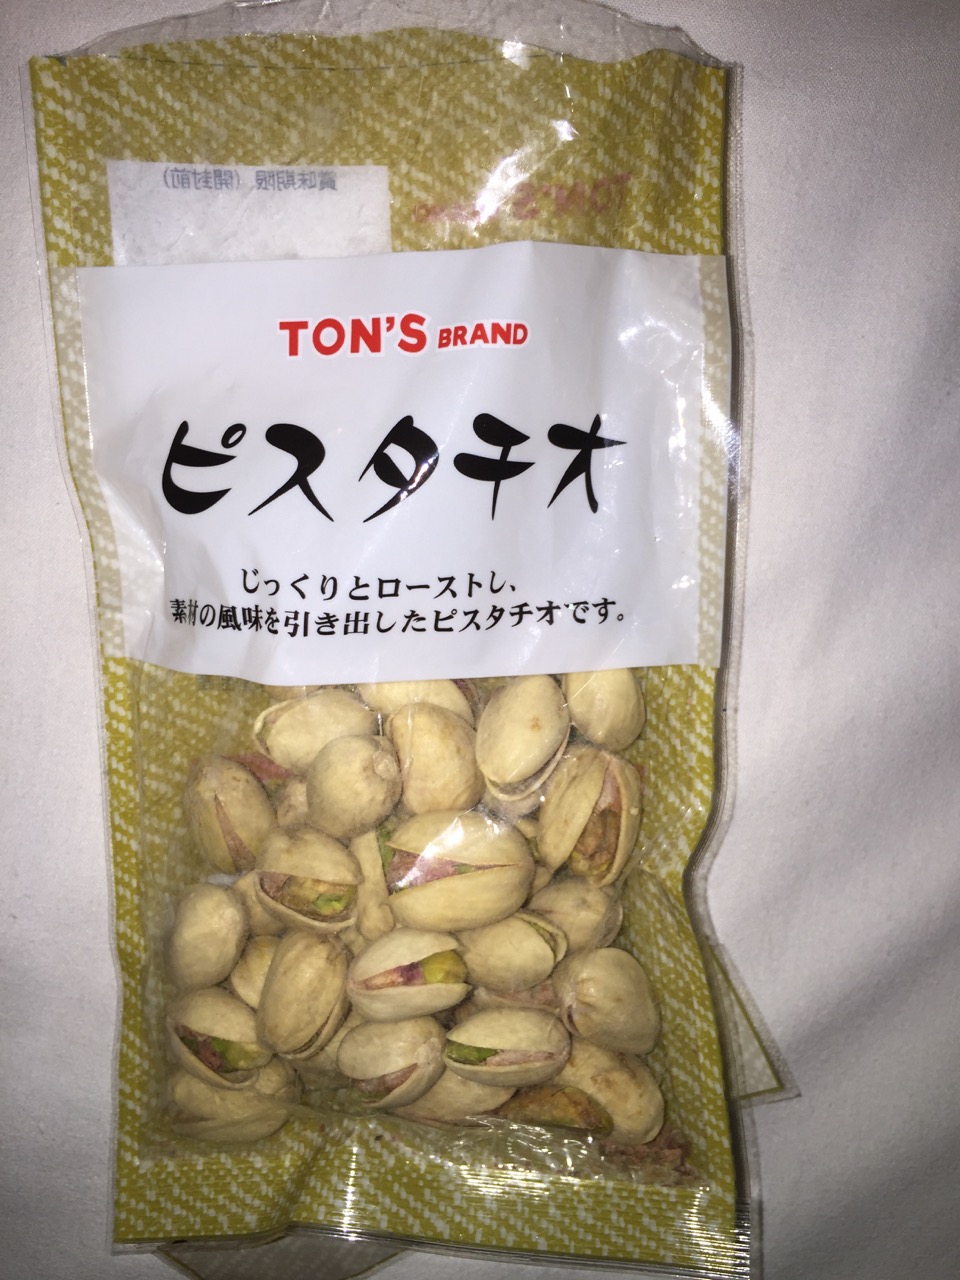 TON's brand pistachios packaging - front